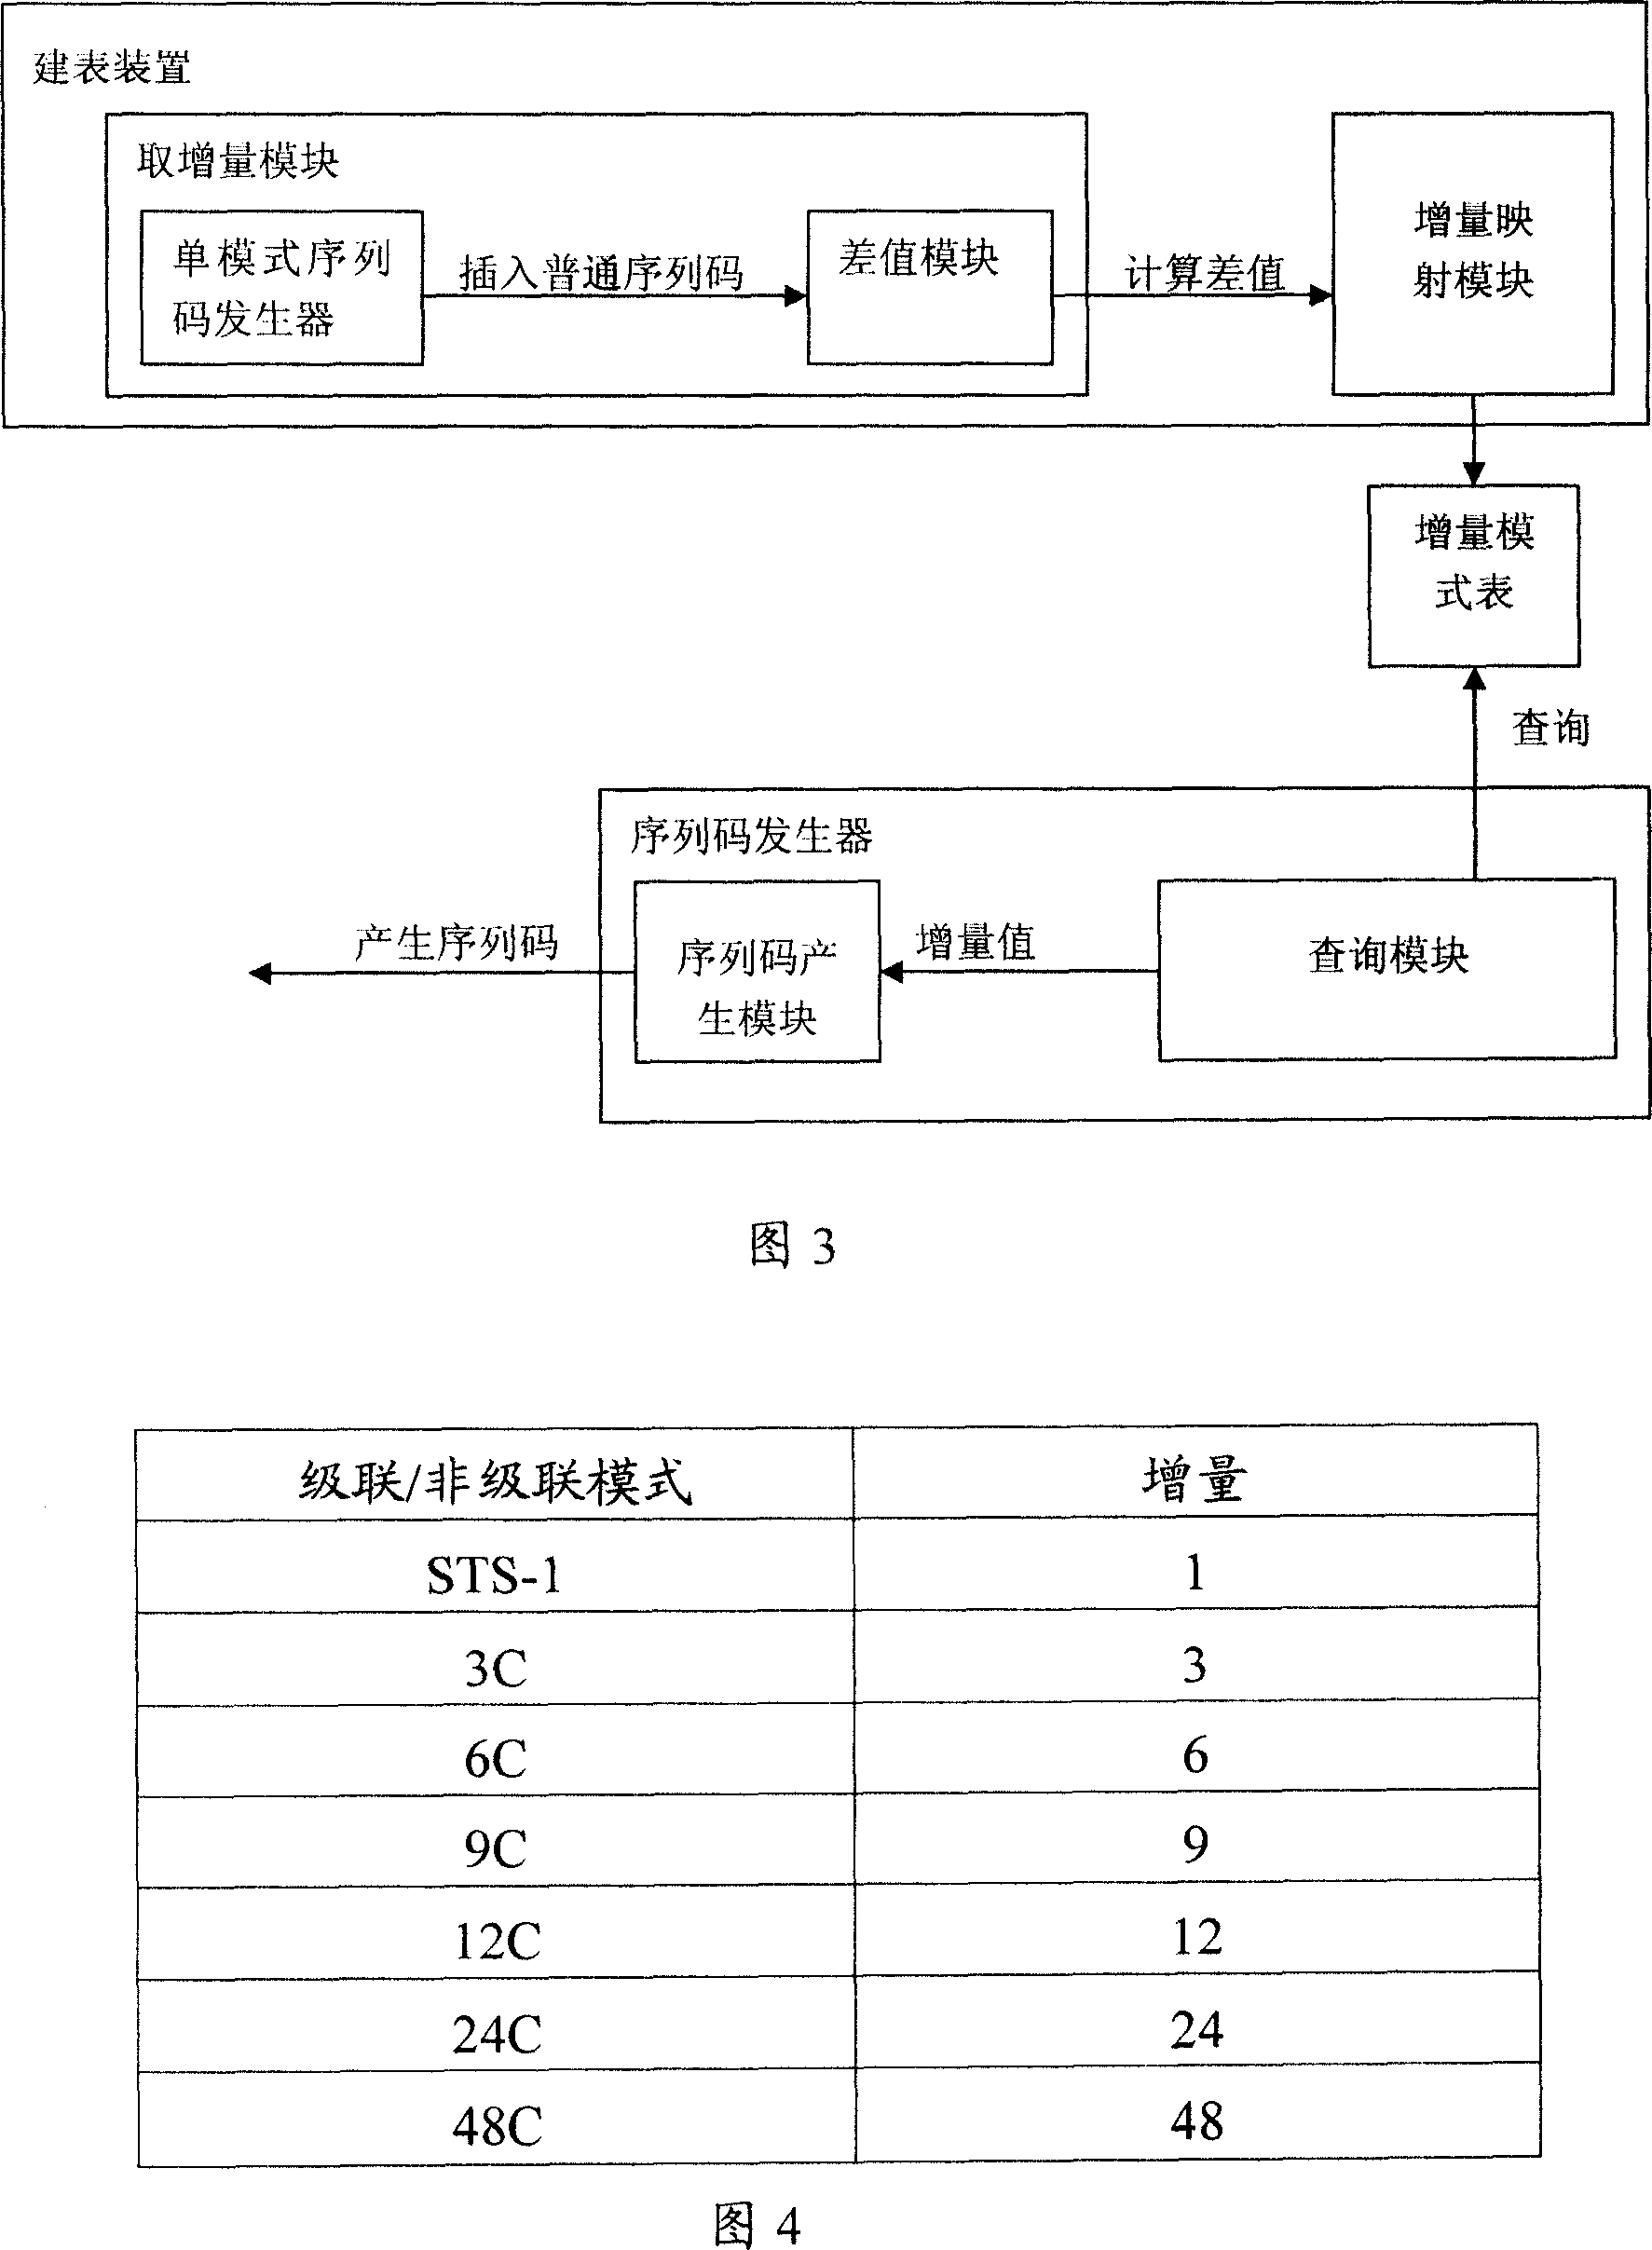 Method and device for generating related sequence number